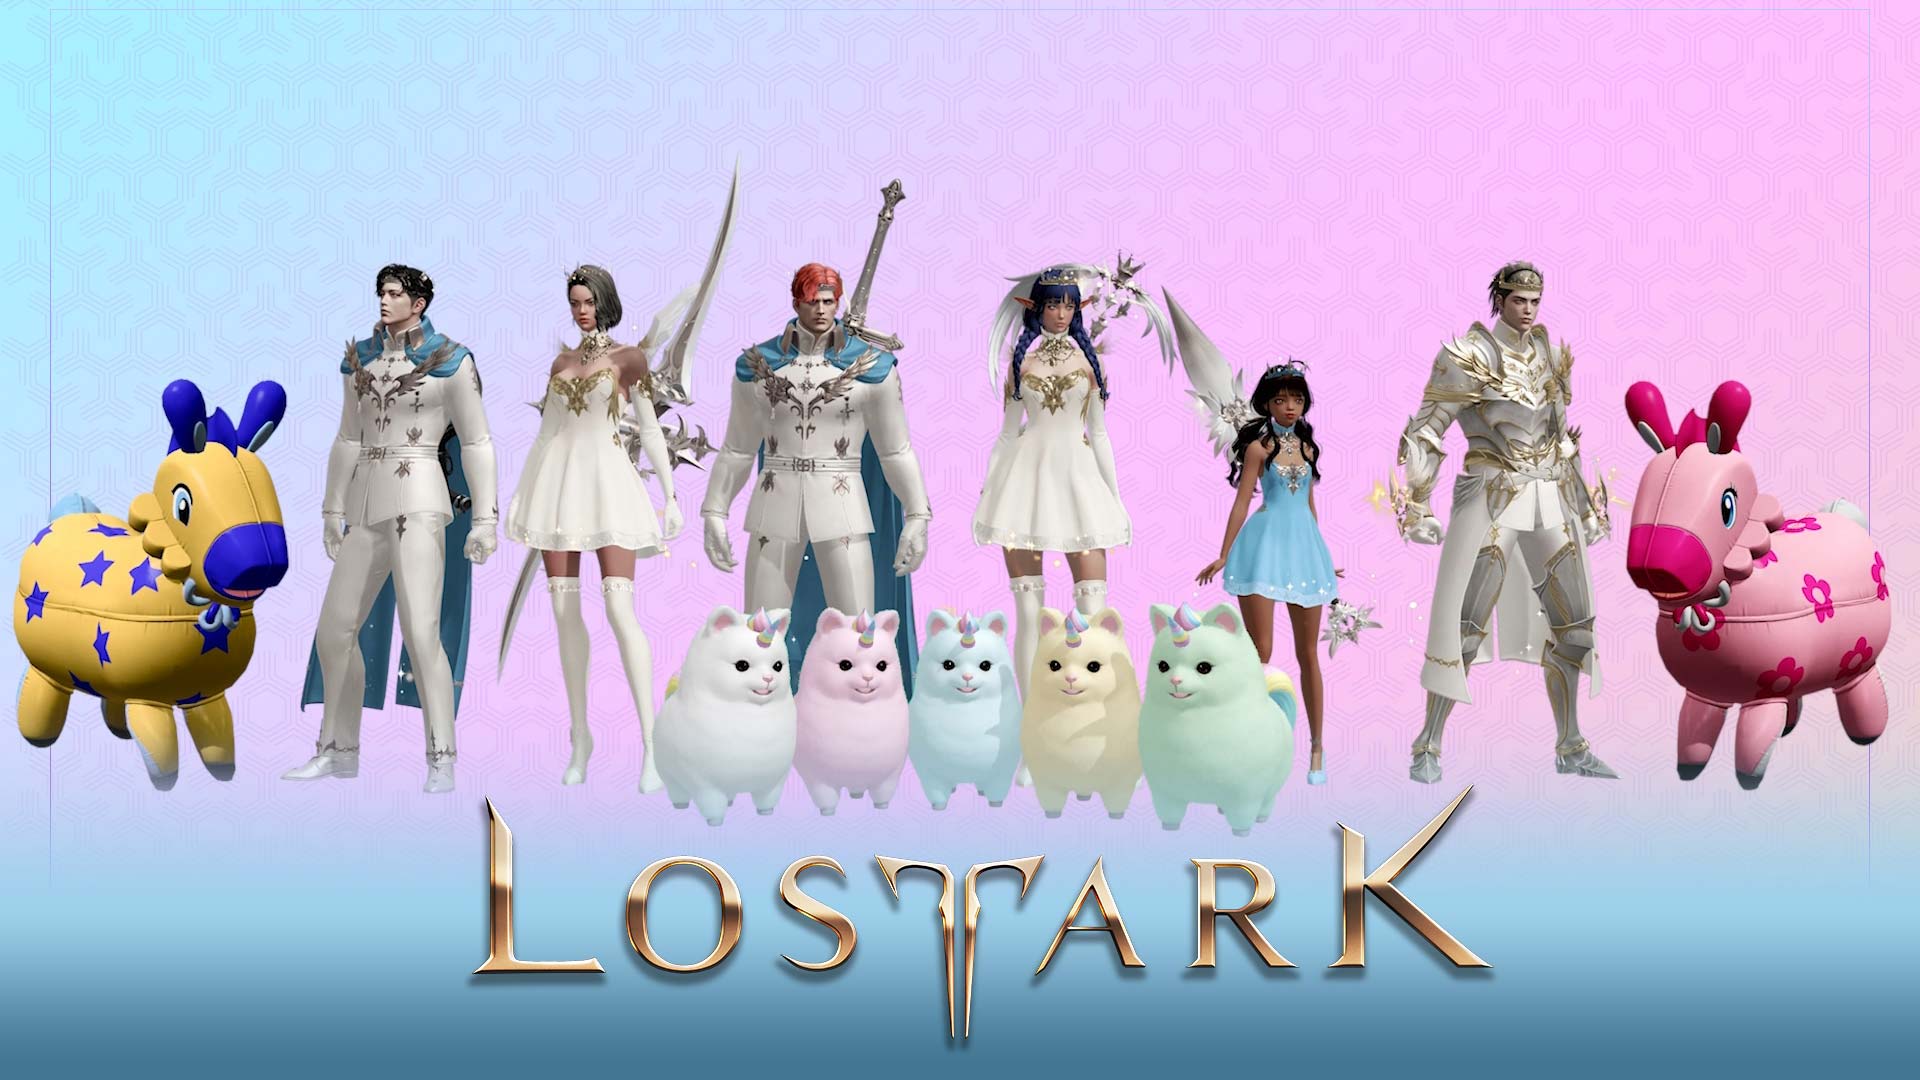 Lost Ark Prime Gaming Loot - News  Lost Ark - Free to Play MMO Action RPG